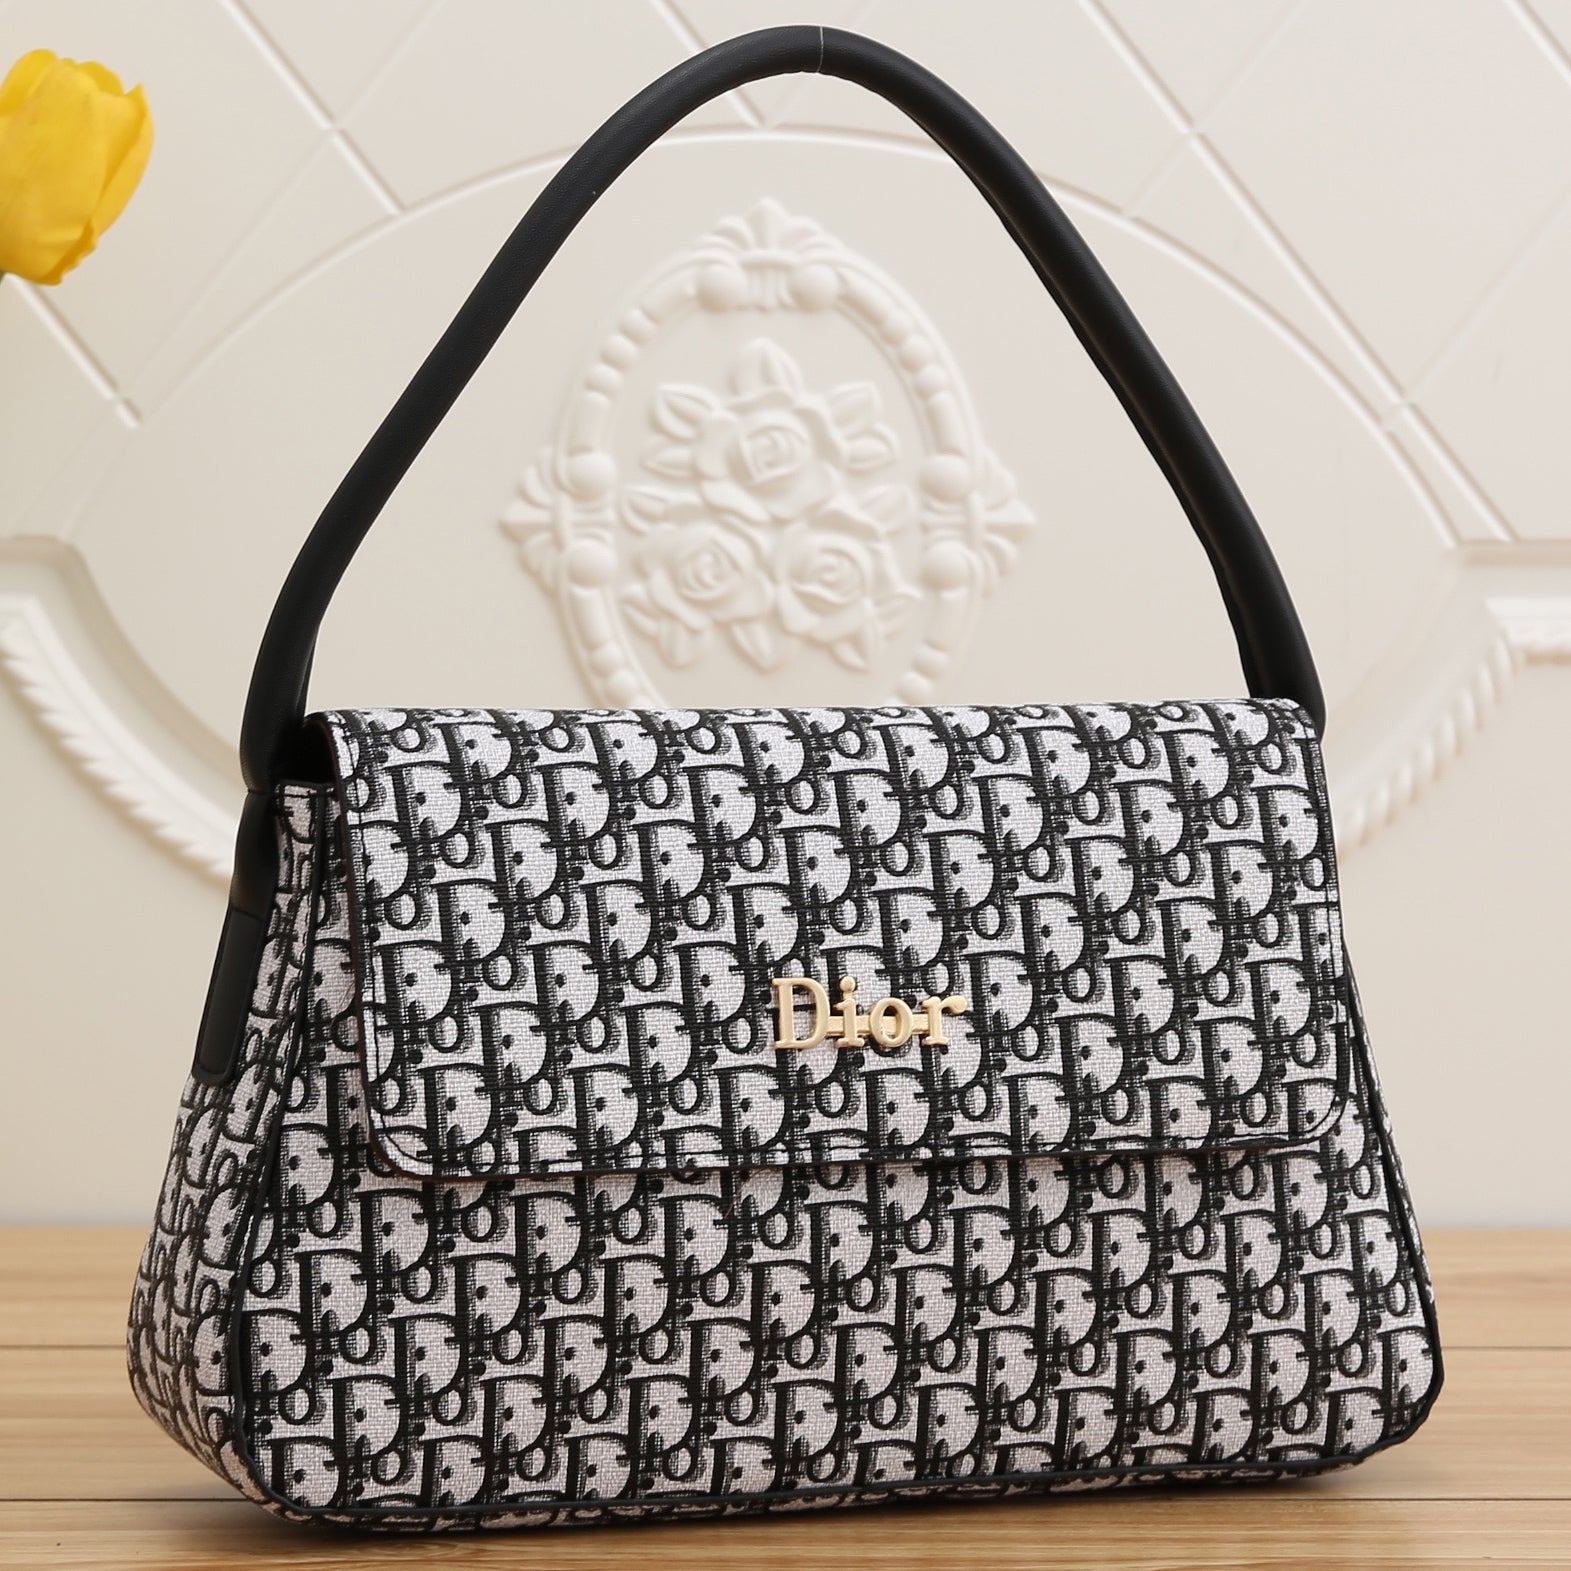 Christian Dior New Letter Print Ladies Shopping Tote Shoulder Ba